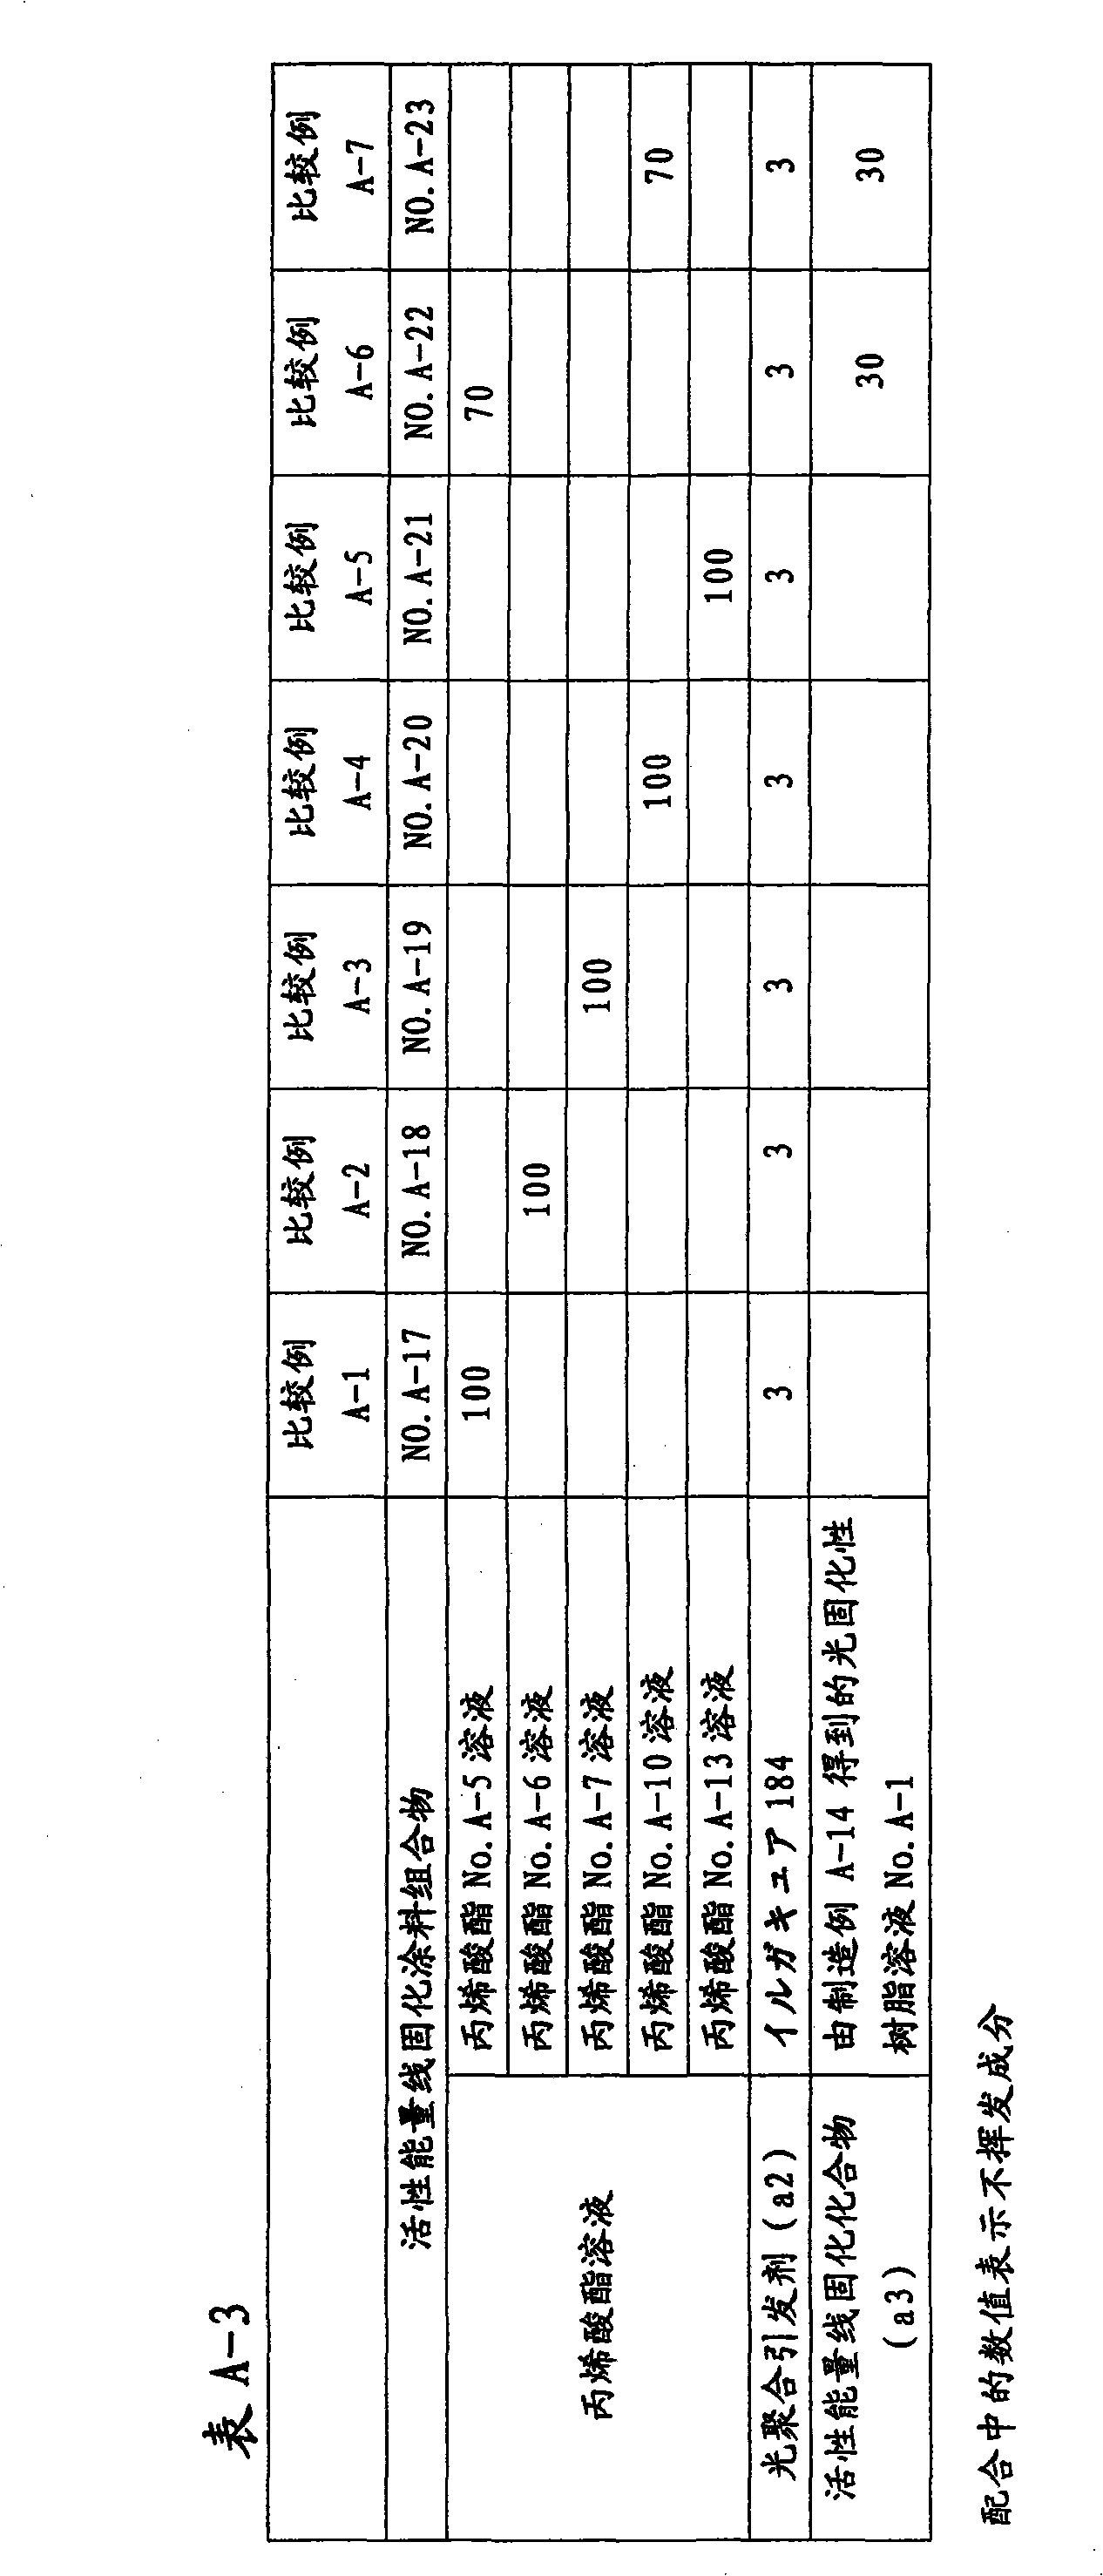 Active energy ray-curable coating composition, method for formation of coating film, and coated article